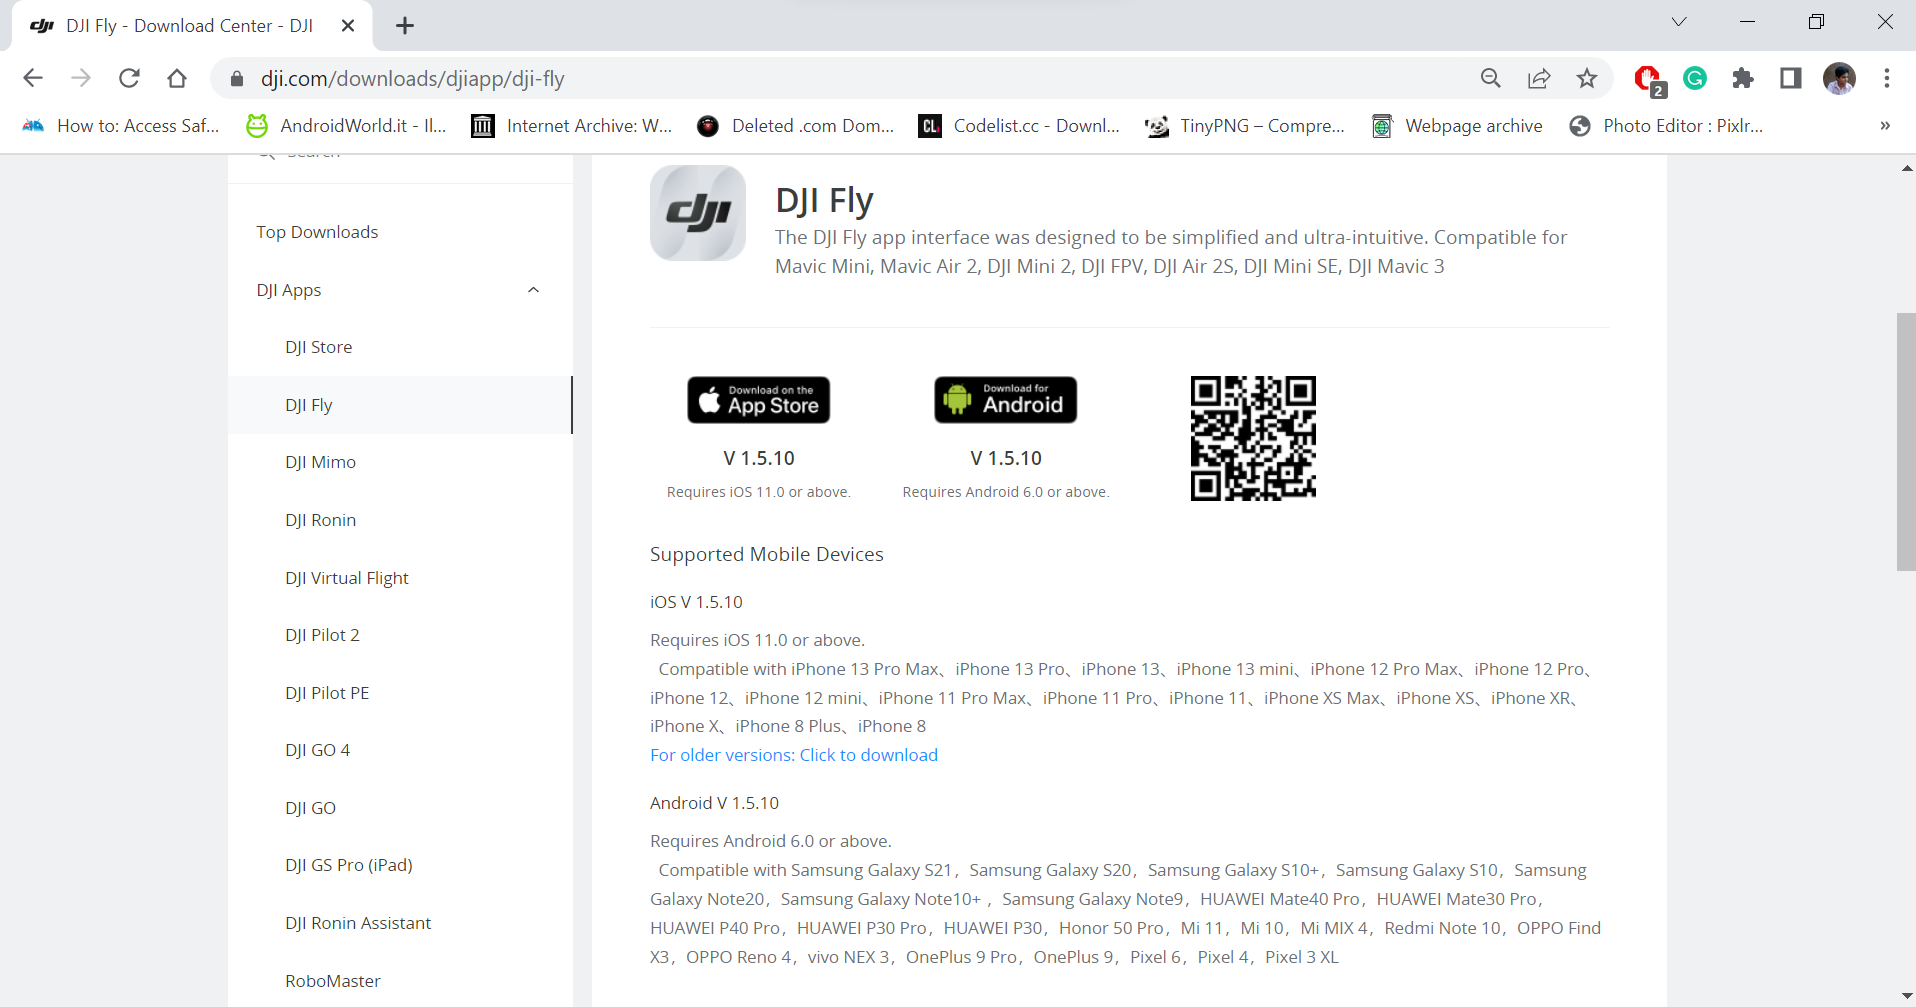 DOWNLOAD - Latest version of DJI Fly